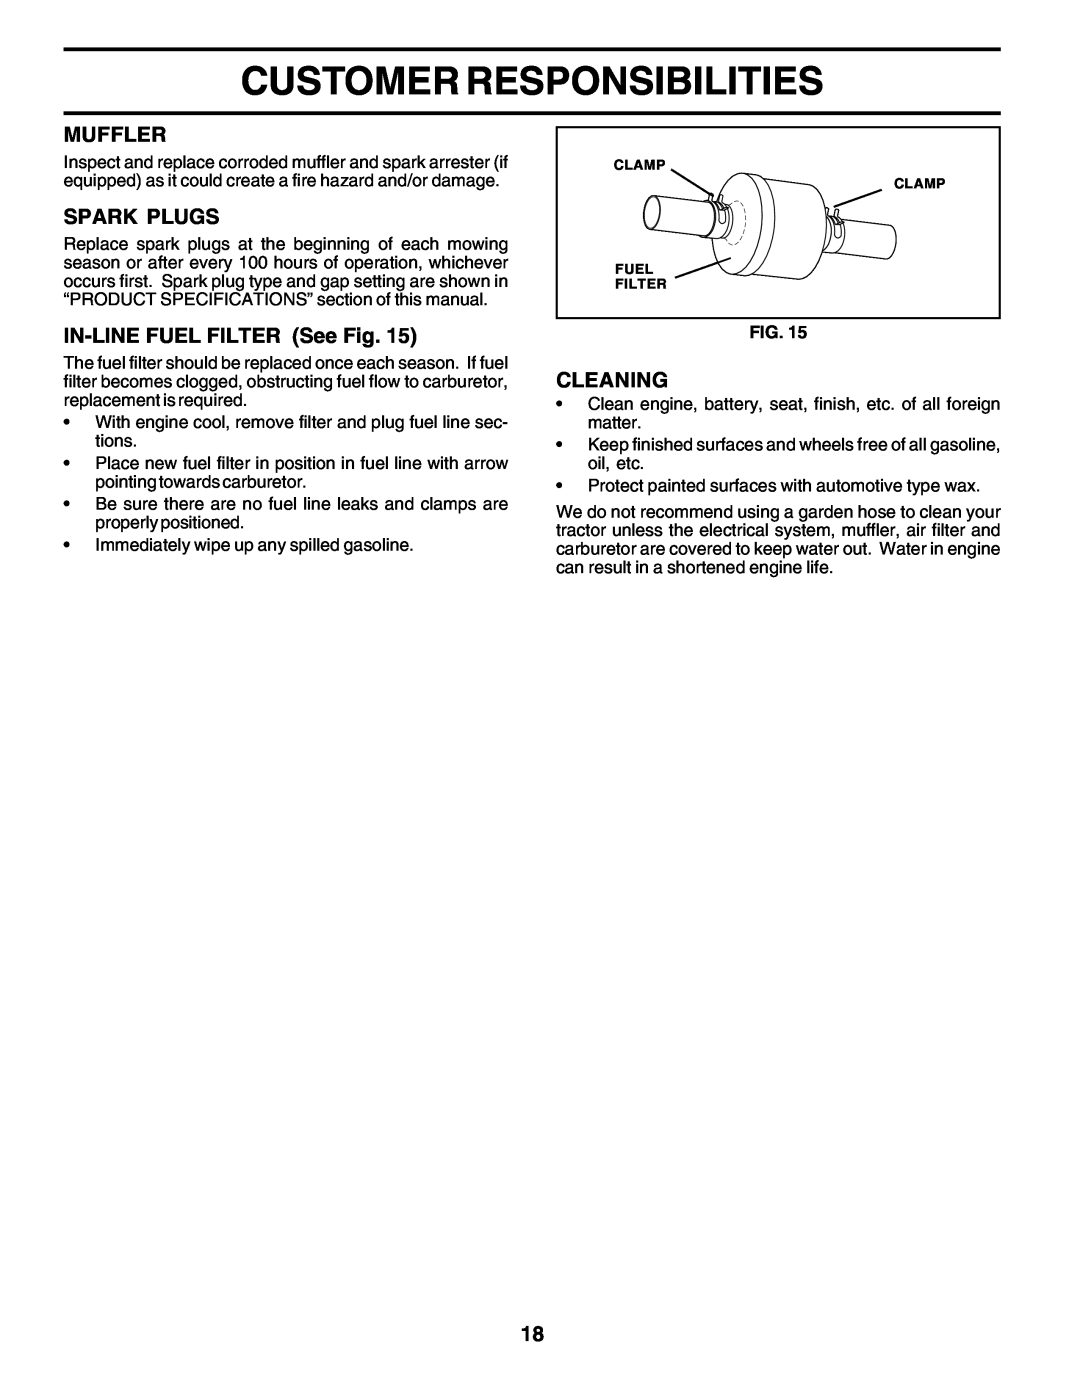 Poulan 179416 manual Customer Responsibilities, Muffler, Spark Plugs, IN-LINE FUEL FILTER See Fig, Cleaning 